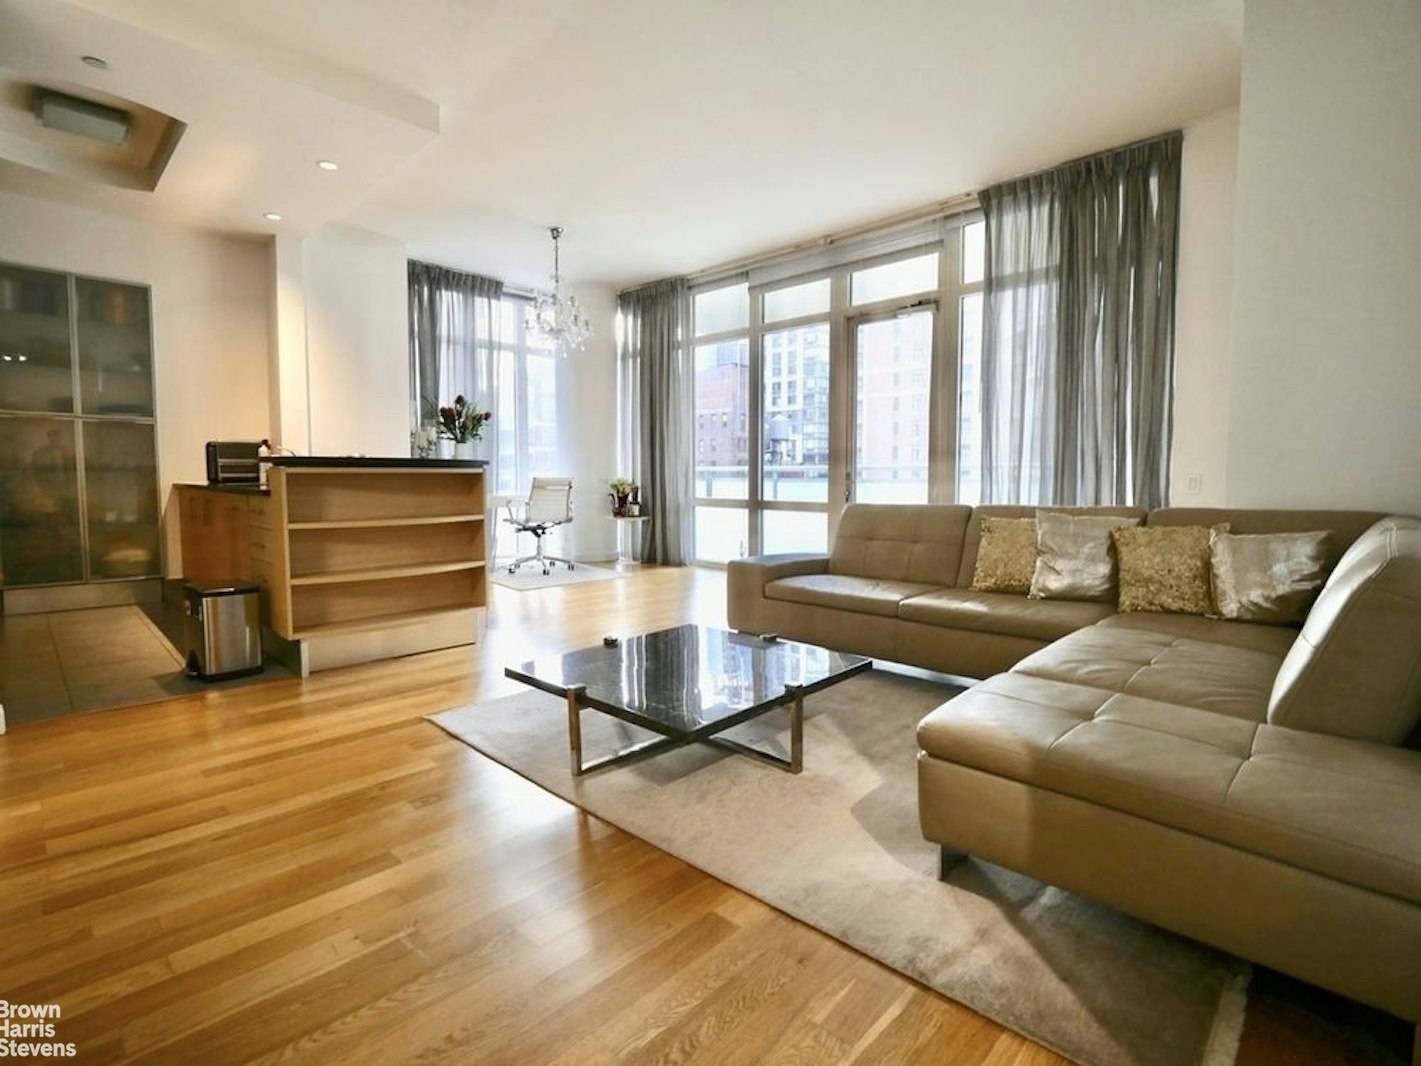 Live in this two bedroom two bath apartment with a balcony looking out to Empire State Building.